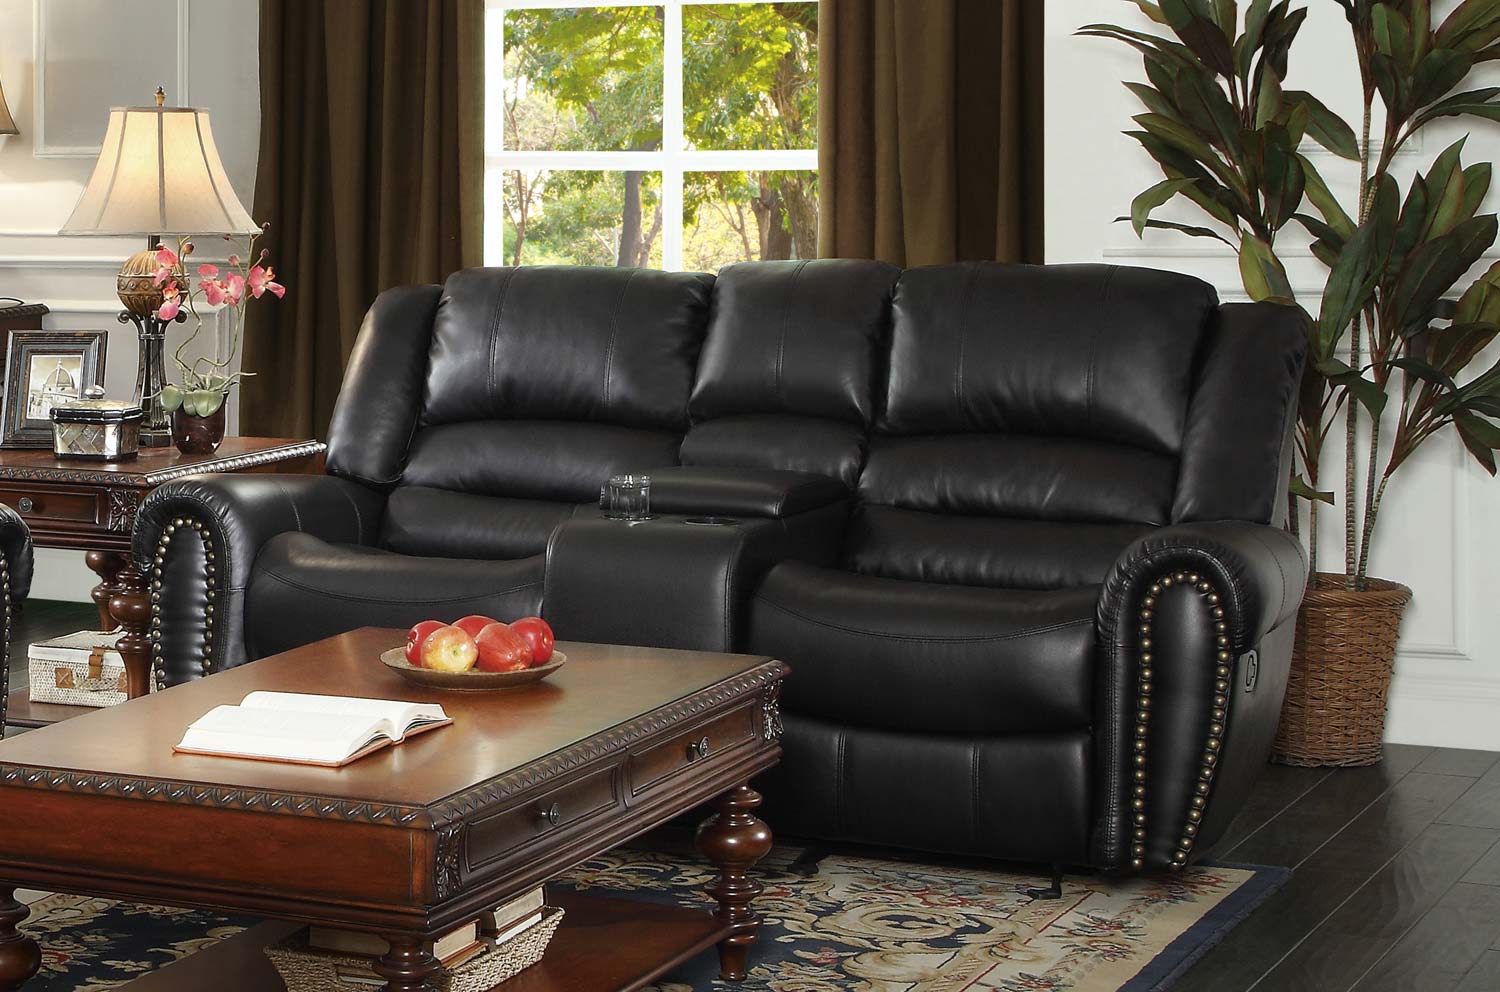 Homelegance Center Hill Double Glider Reclining Love Seat with Center Console - Black Bonded Leather Match